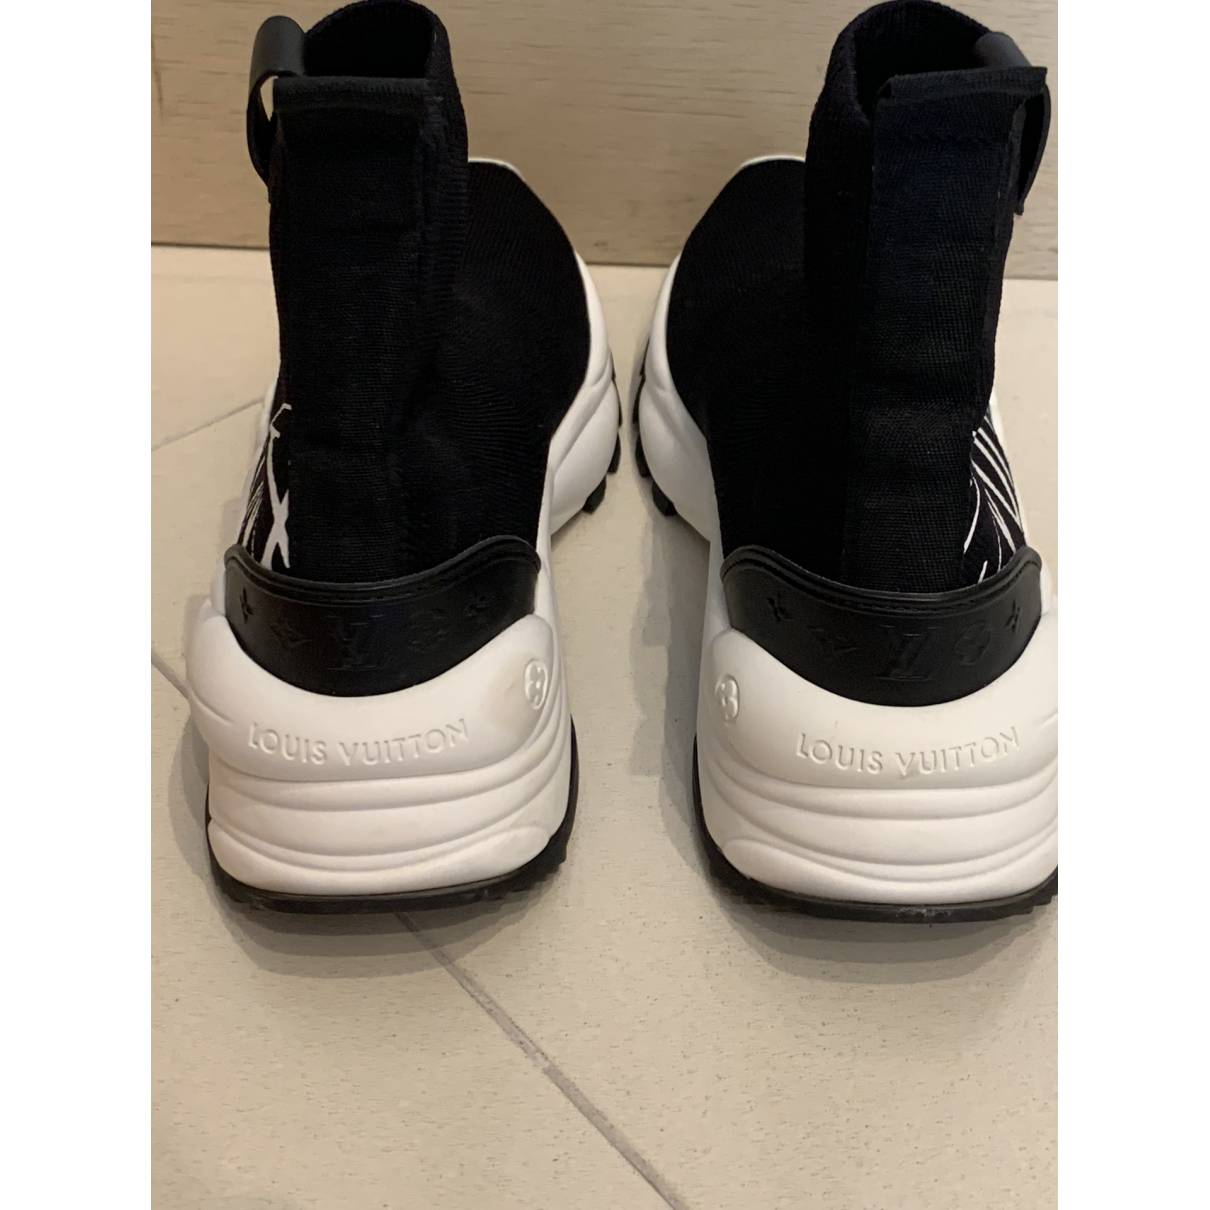 Louis Vuitton Trainer Black Sneaker Review & On Foot 